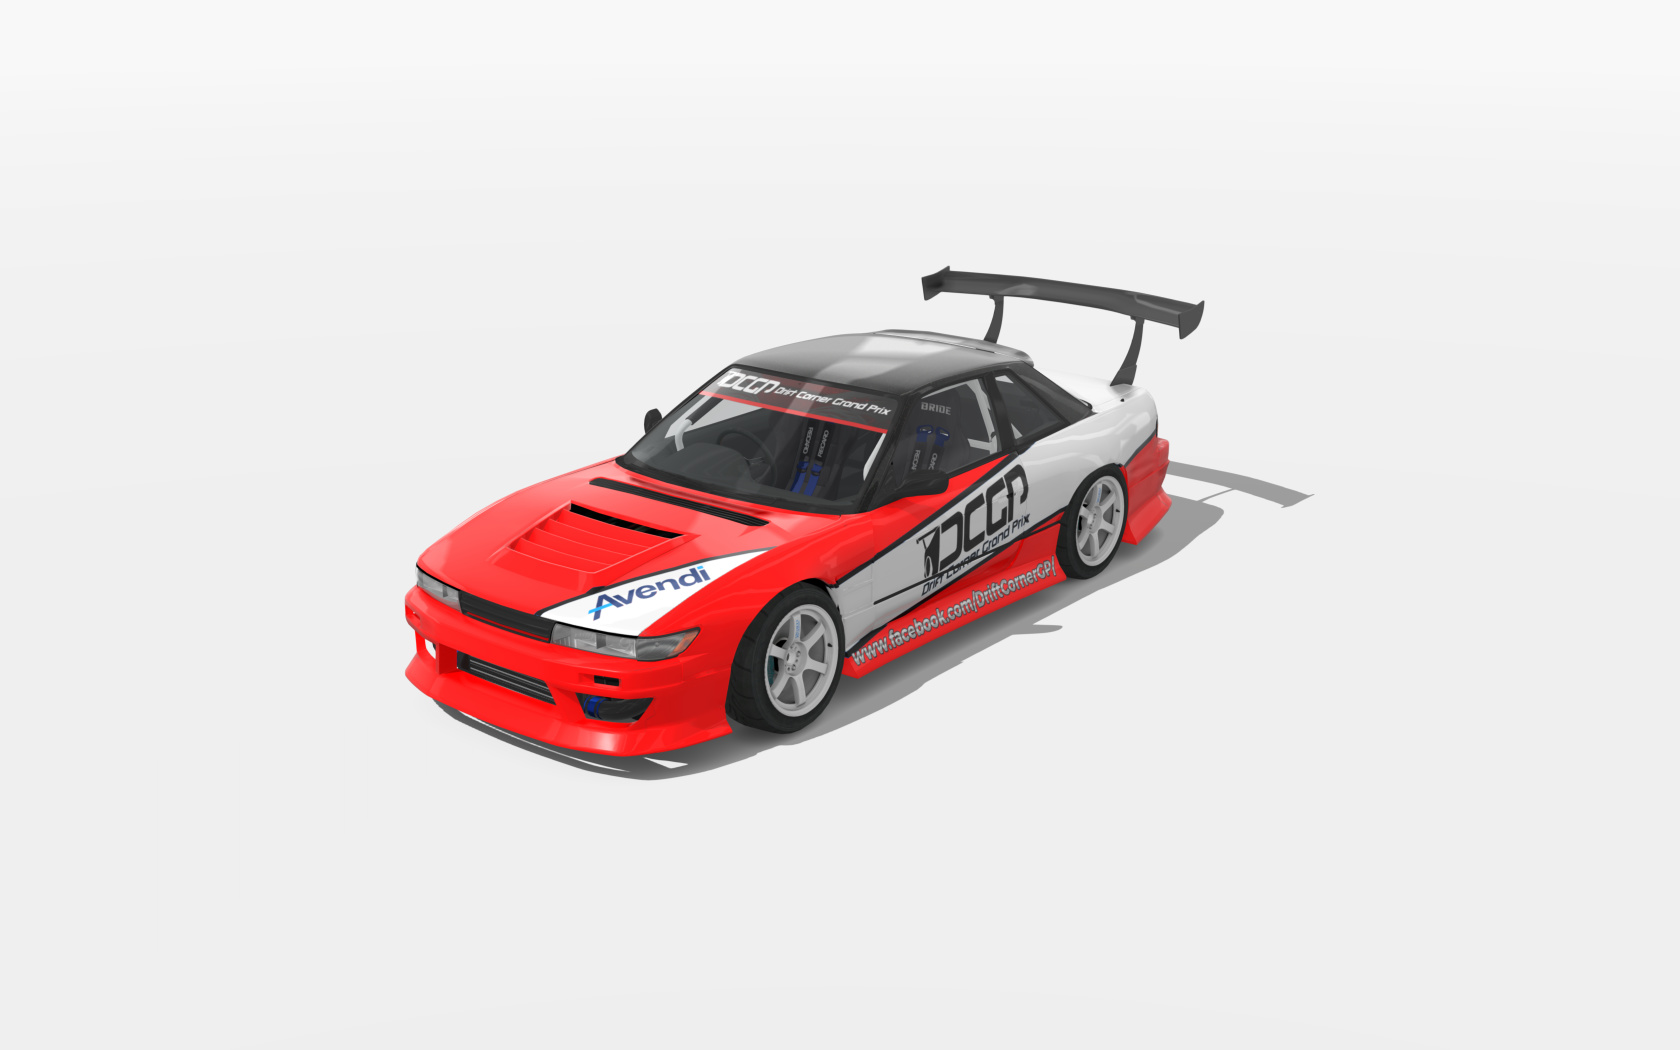 DCGP Nissan S13, skin red